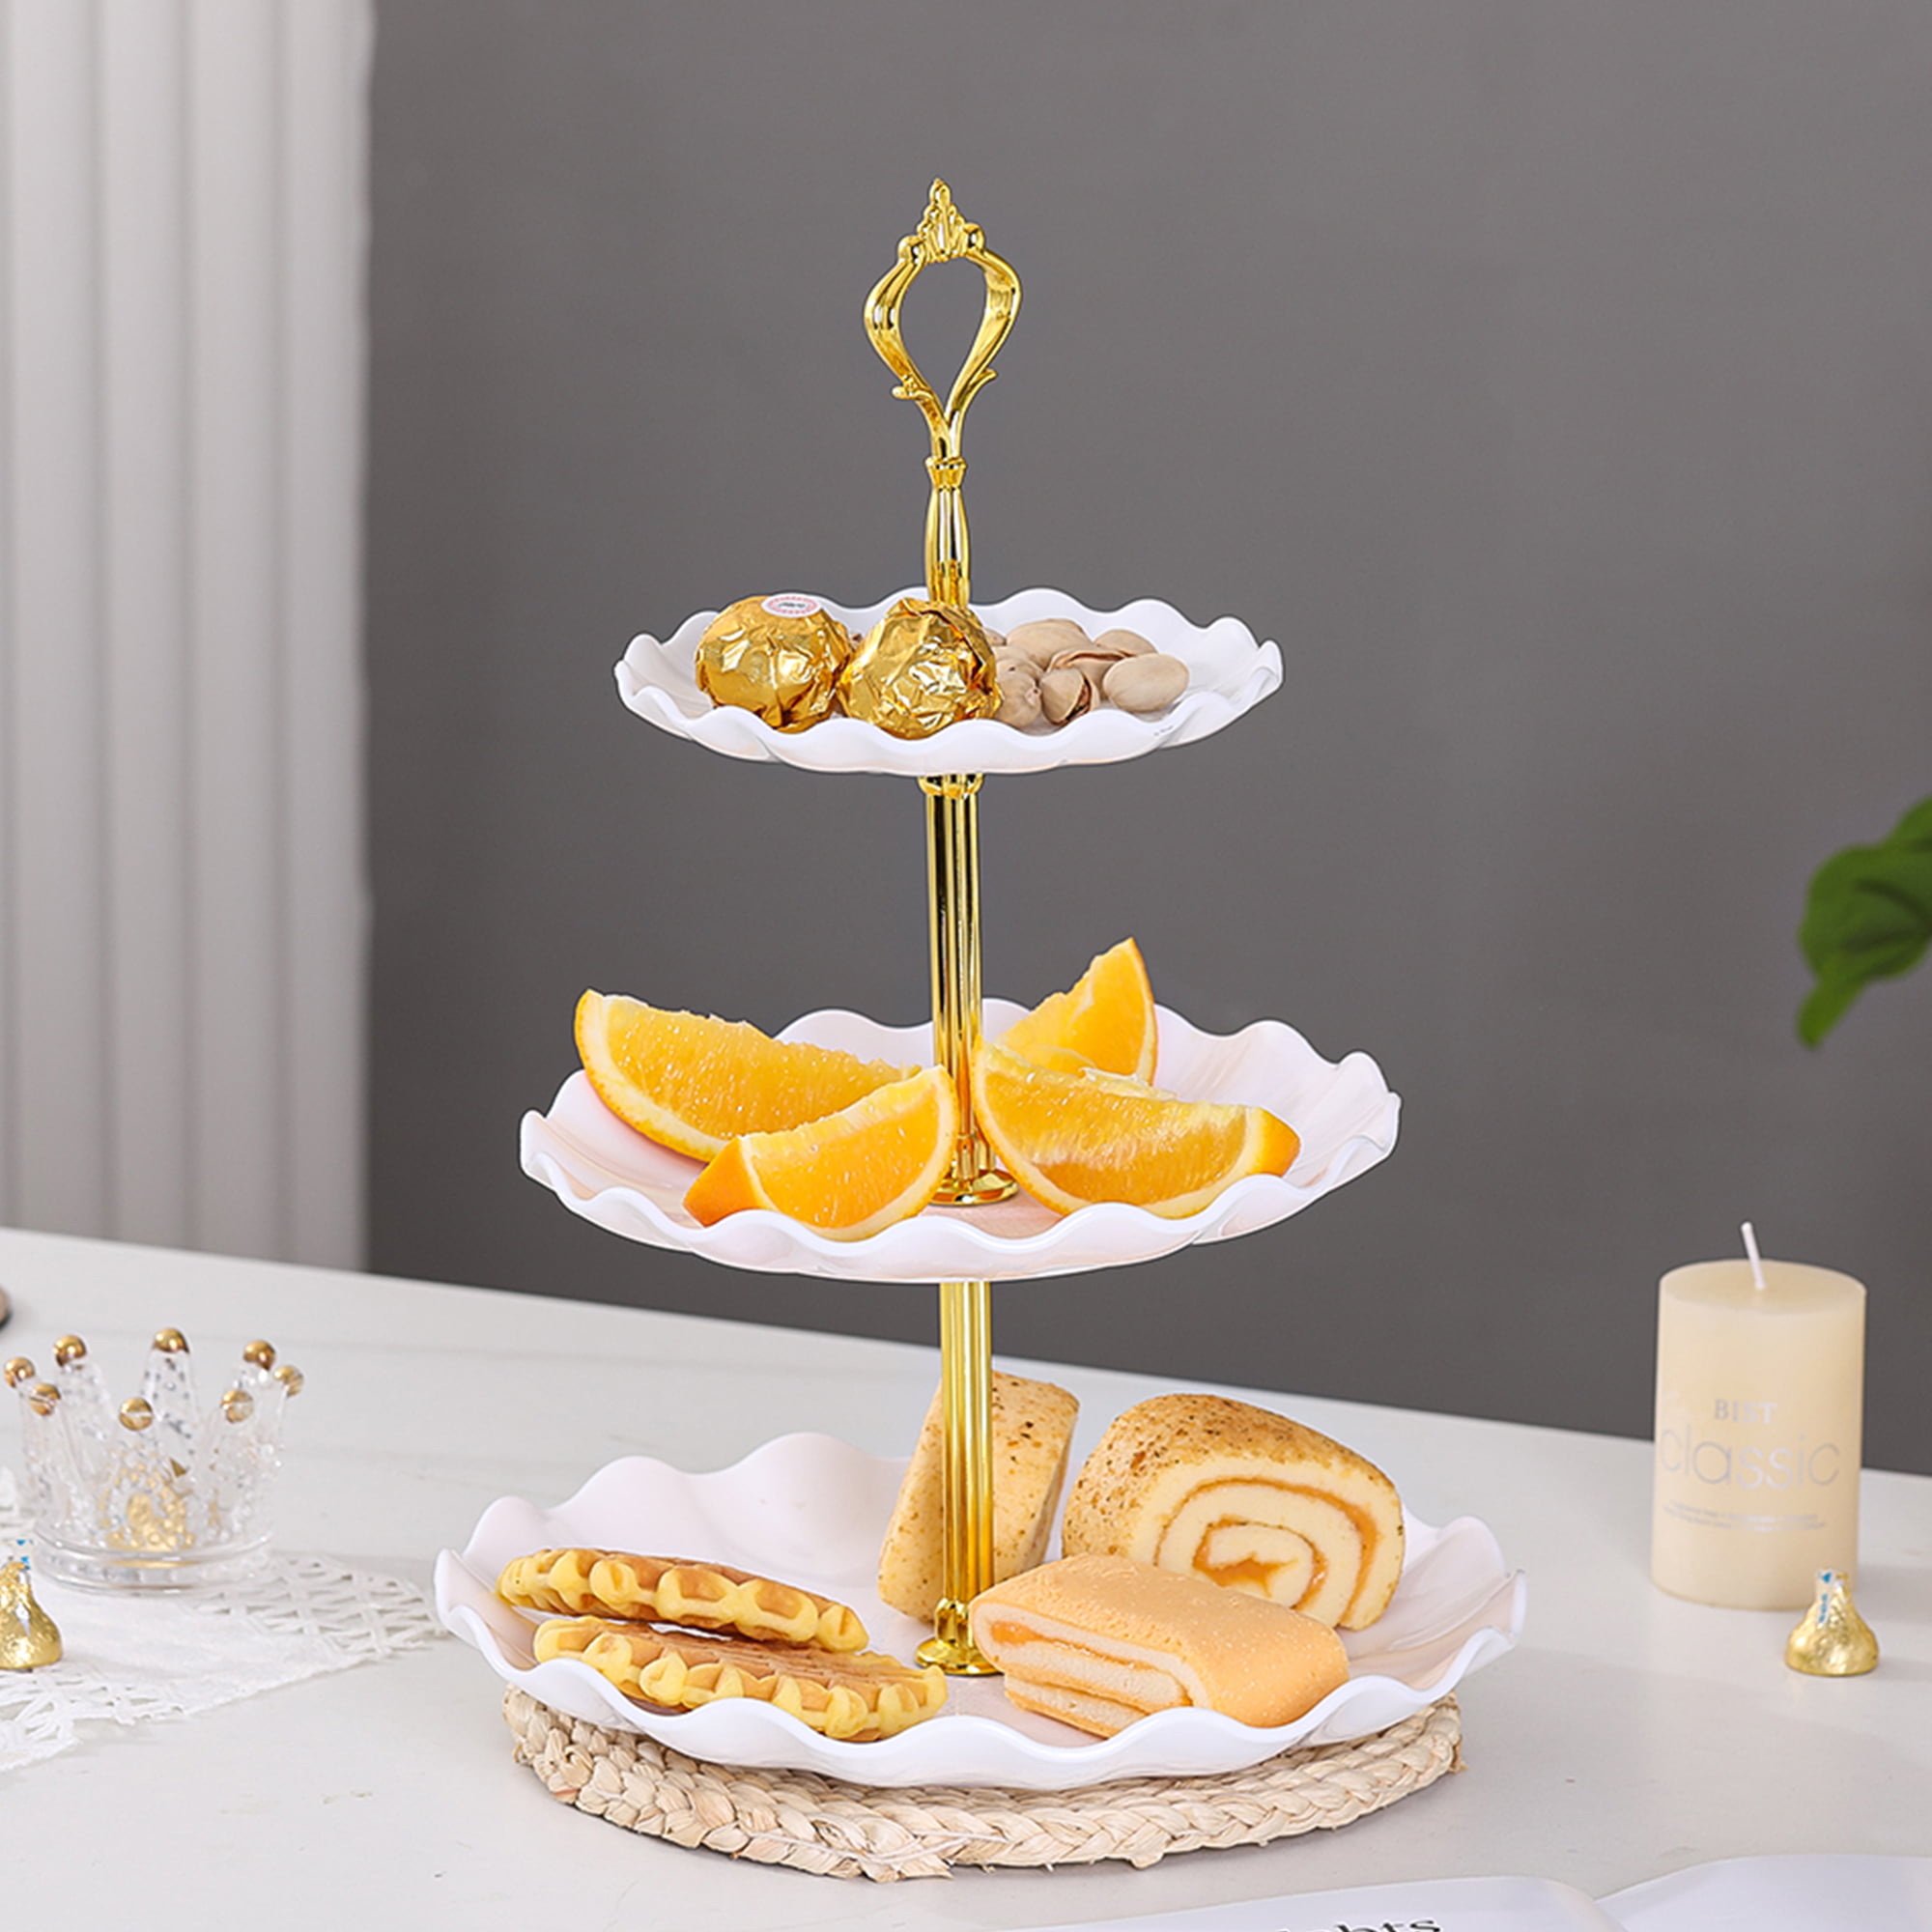 Crystal Ball Cake Stand Wedding Party Cake Decoration Crystal Ball  Accessories | eBay